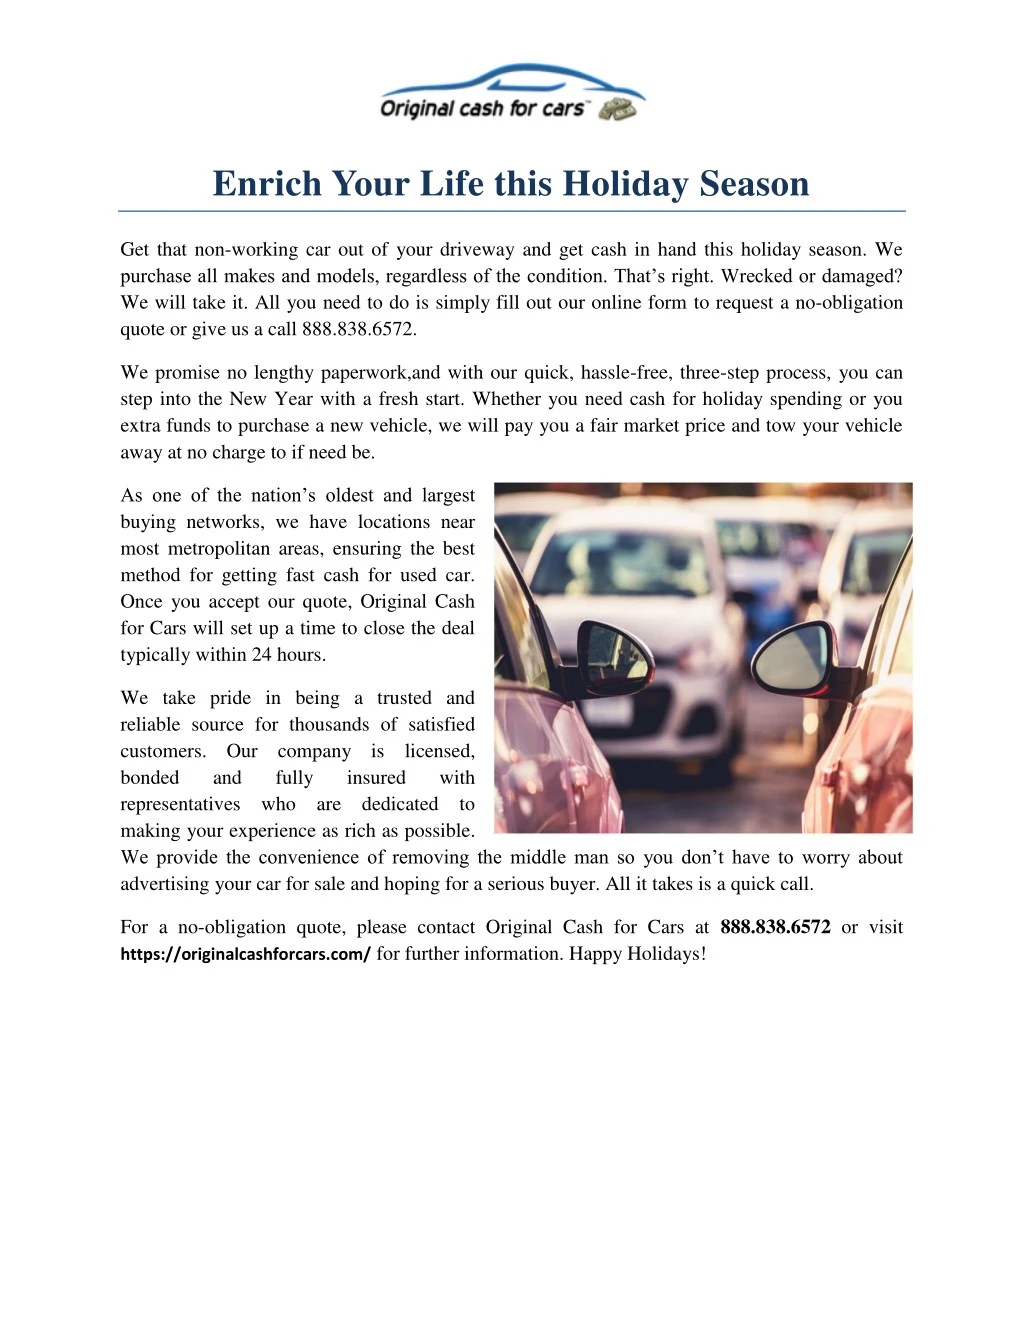 enrich your life this holiday season